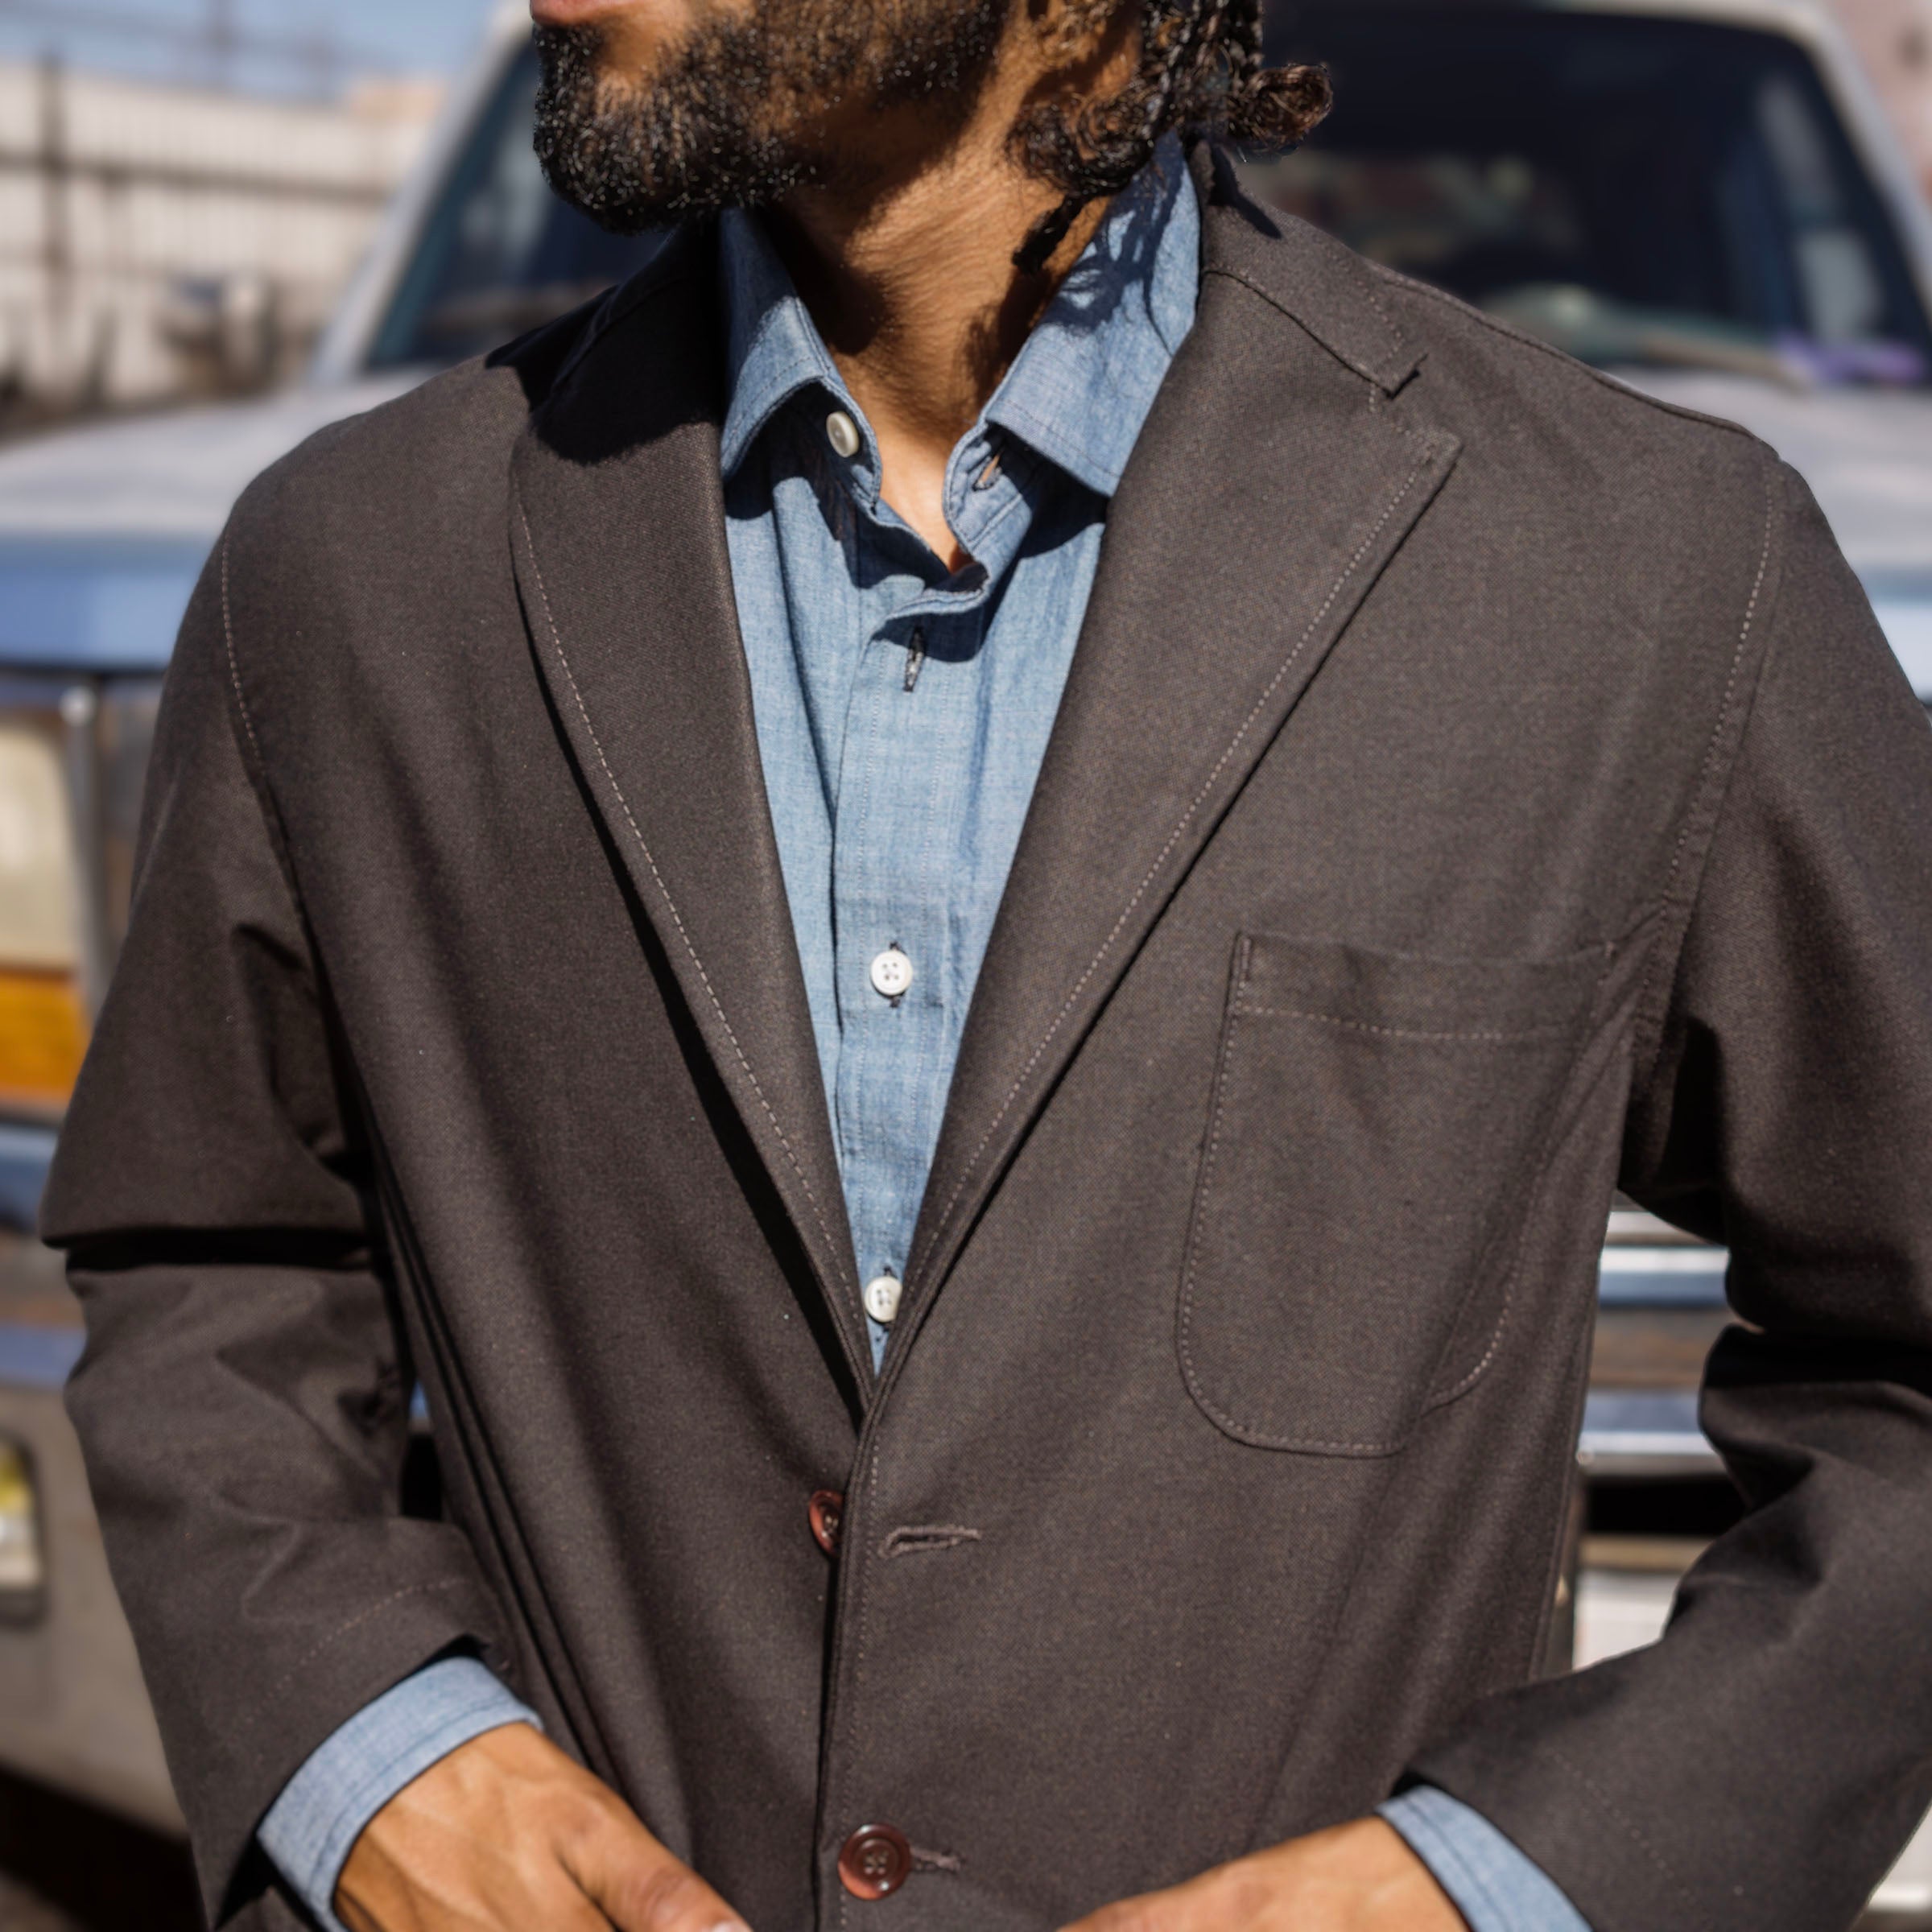 Casual Suiting in Espresso Washable Cotton/Wool Hopsack